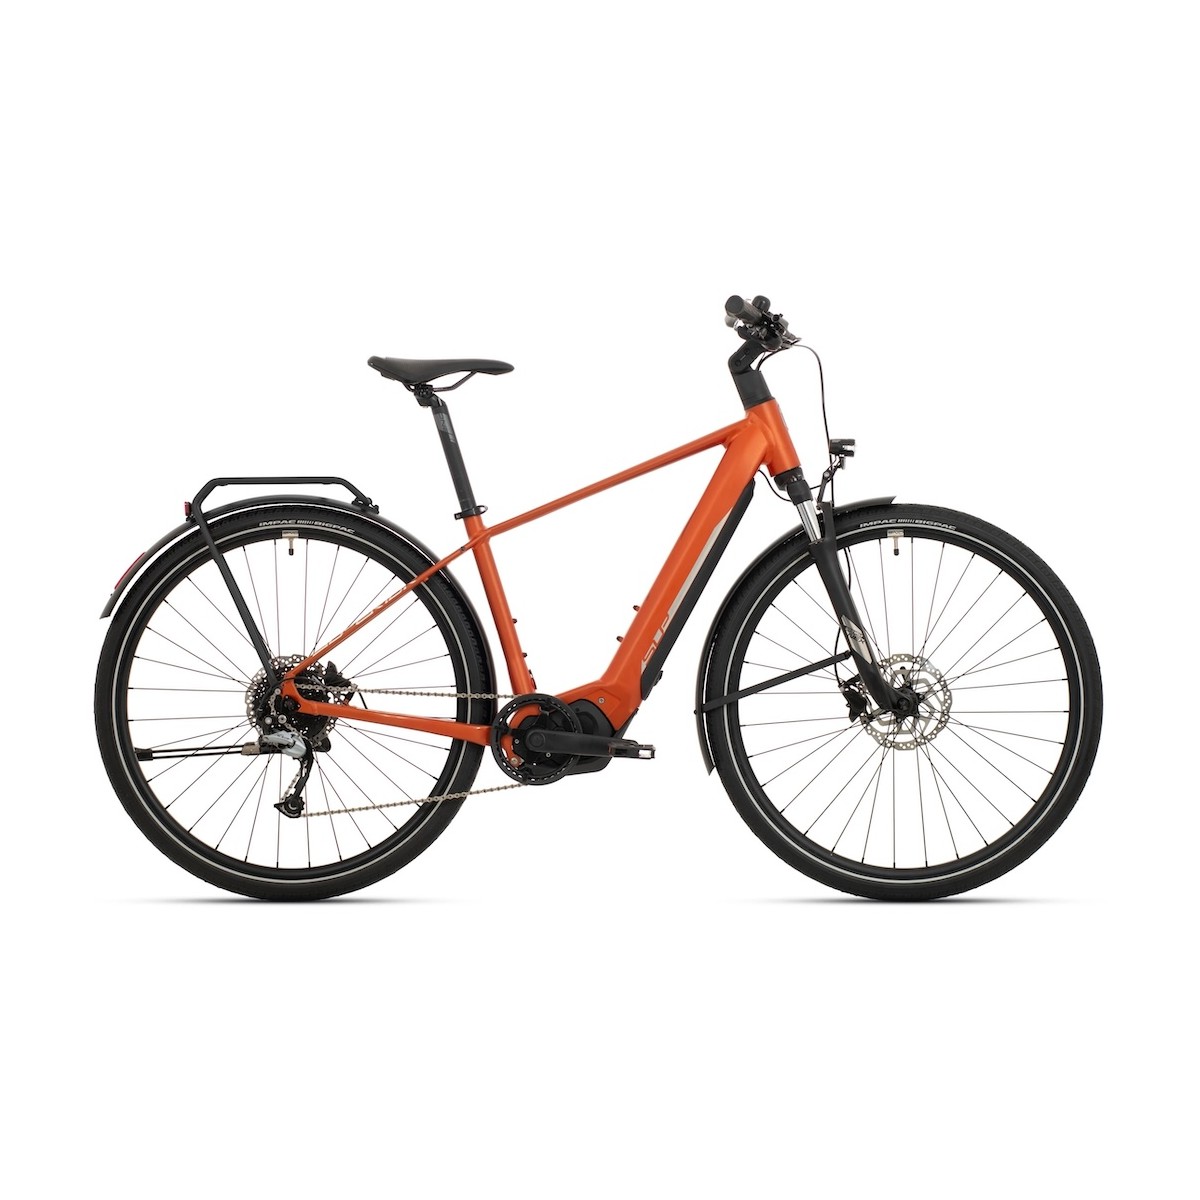 SUPERIOR EXR 6030 TOURING electric bicycle - matte copper/chrome silver 2022